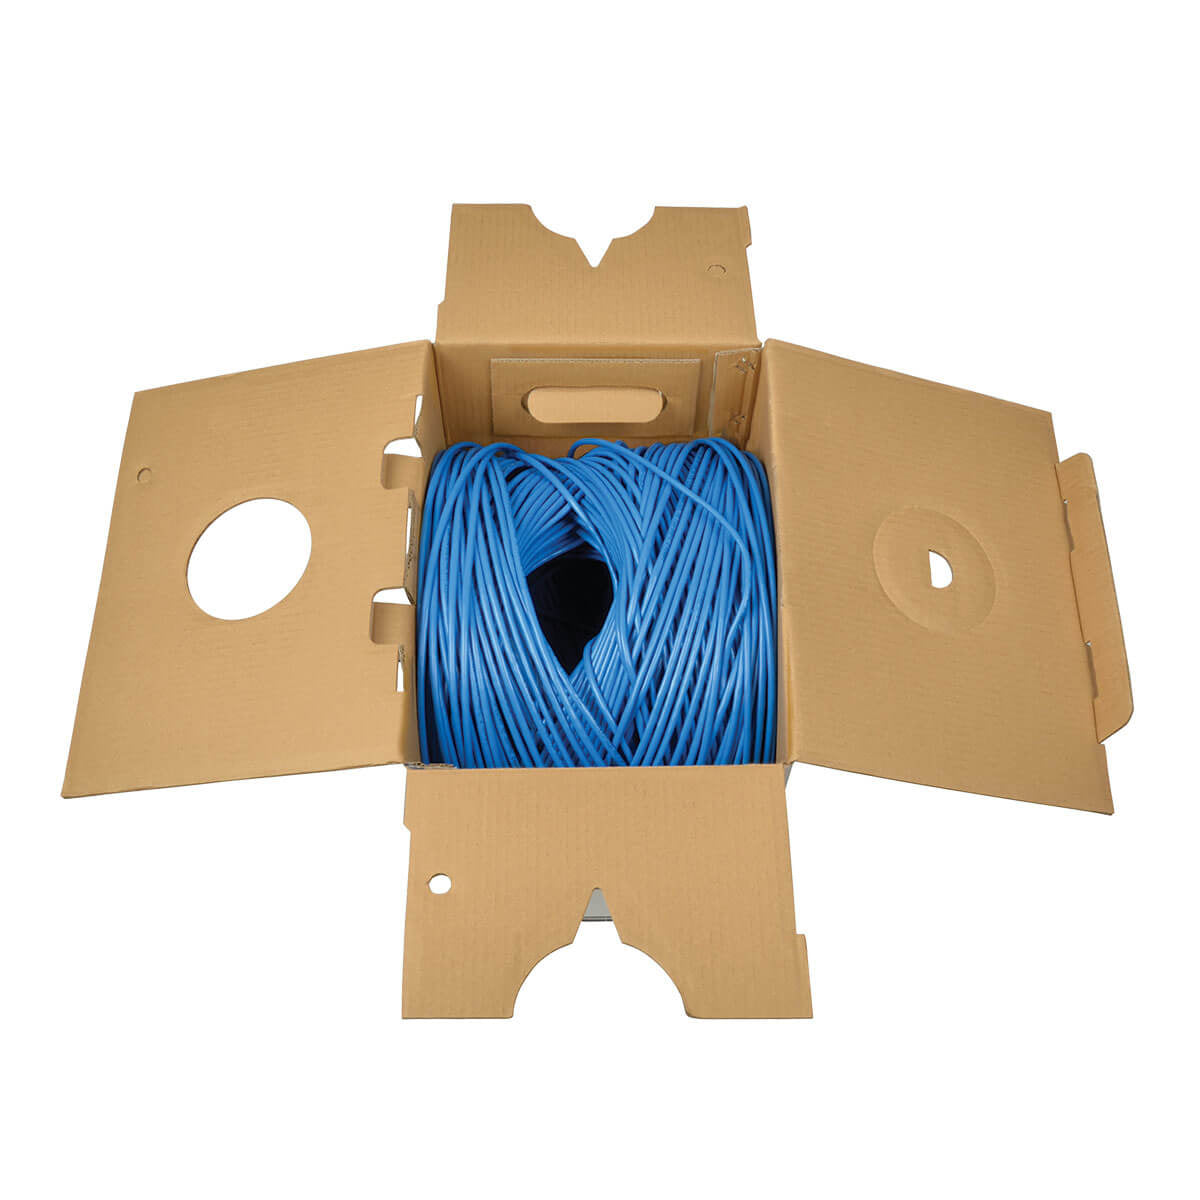 Cable Trip Lite N222-01K-GY, Cat5e 350 MHz, 304.8m, Azul